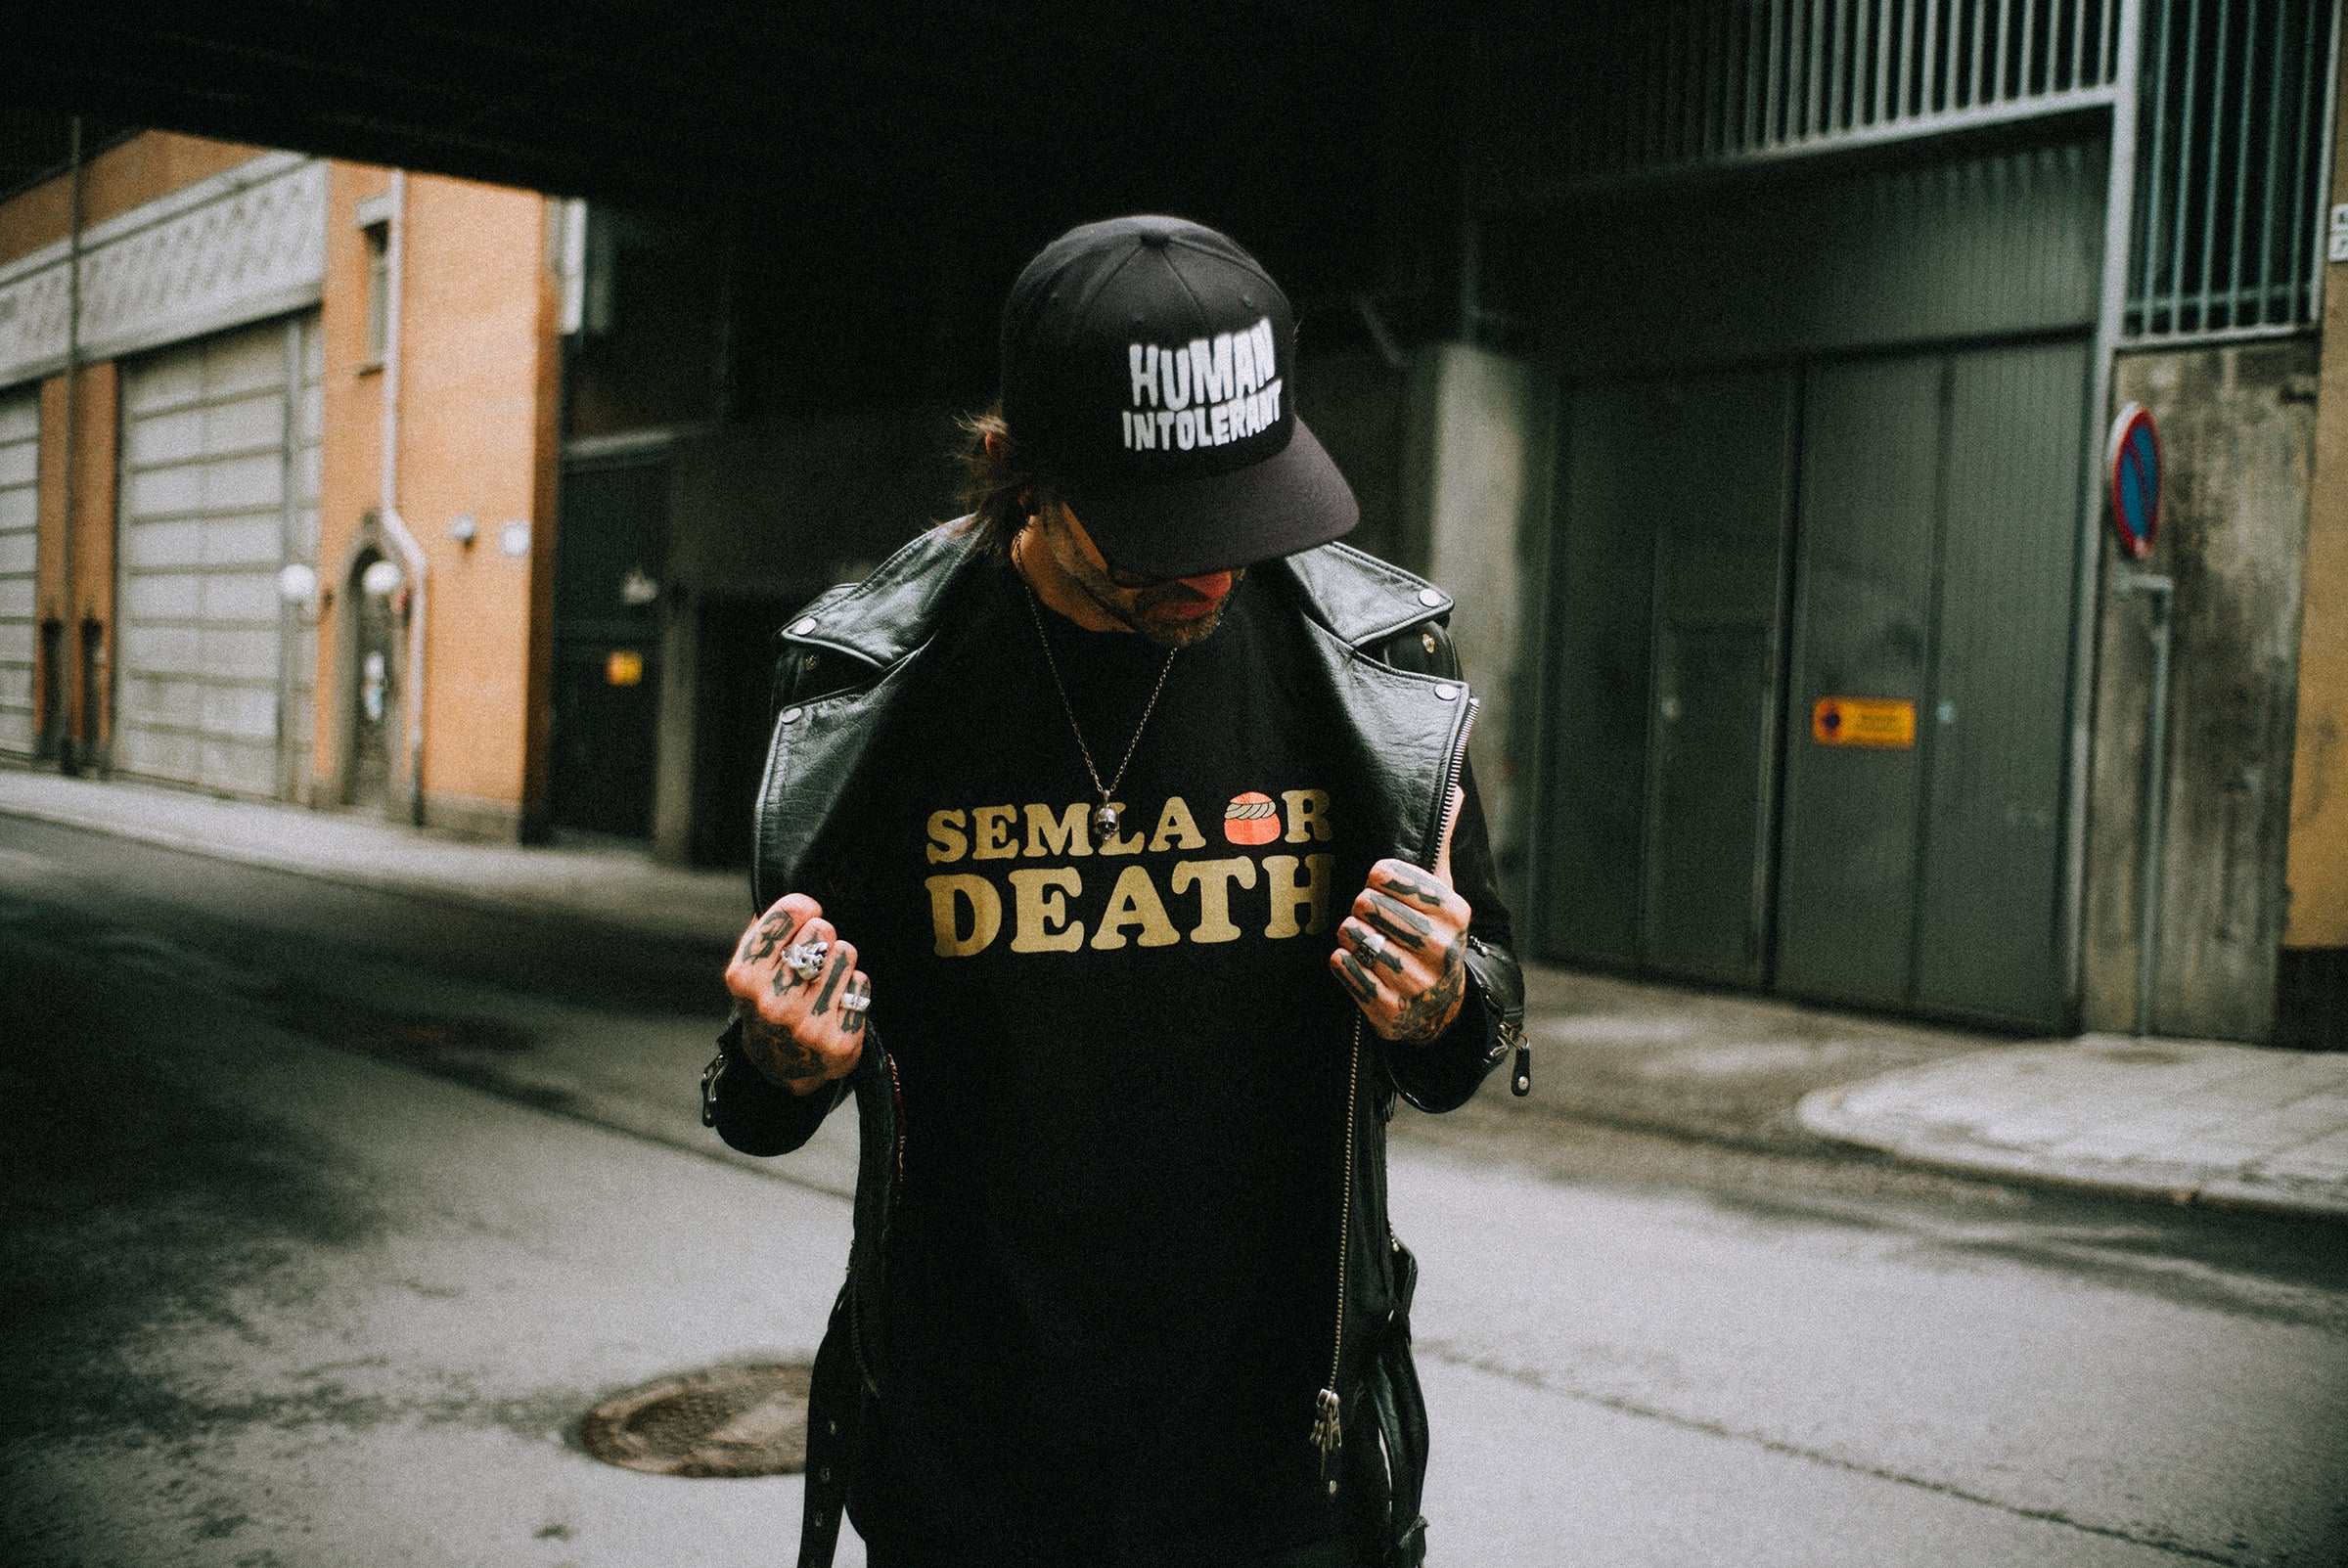 semla or death t-shirt worn by photographer Ben Alexis. Design and sold by Mangobeard Design Co